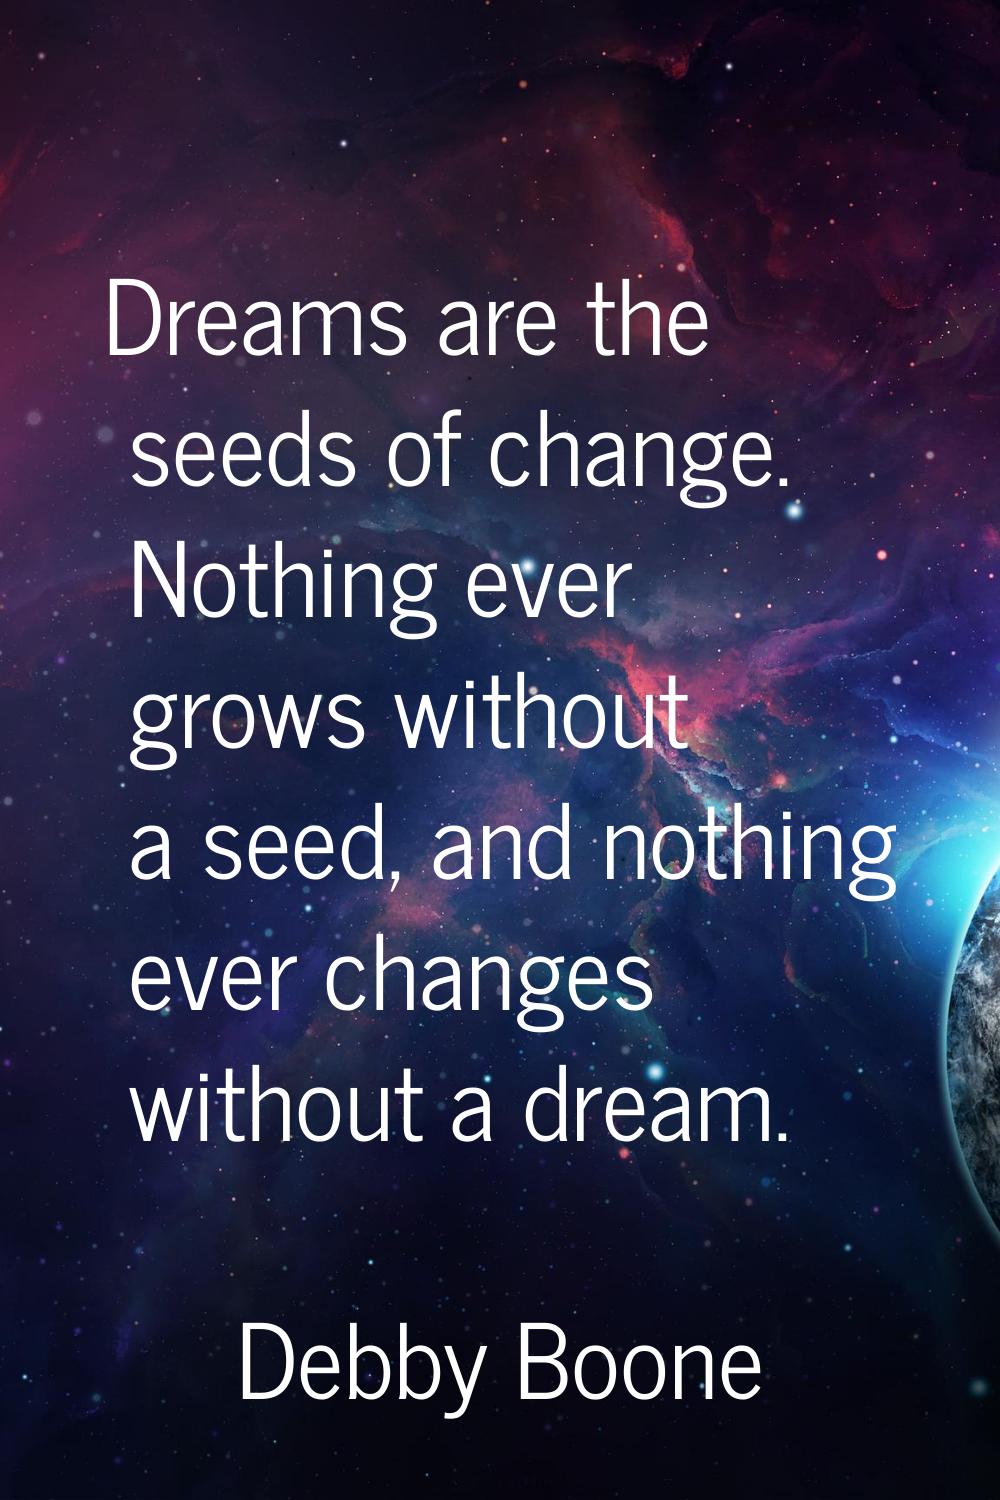 Dreams are the seeds of change. Nothing ever grows without a seed, and nothing ever changes without